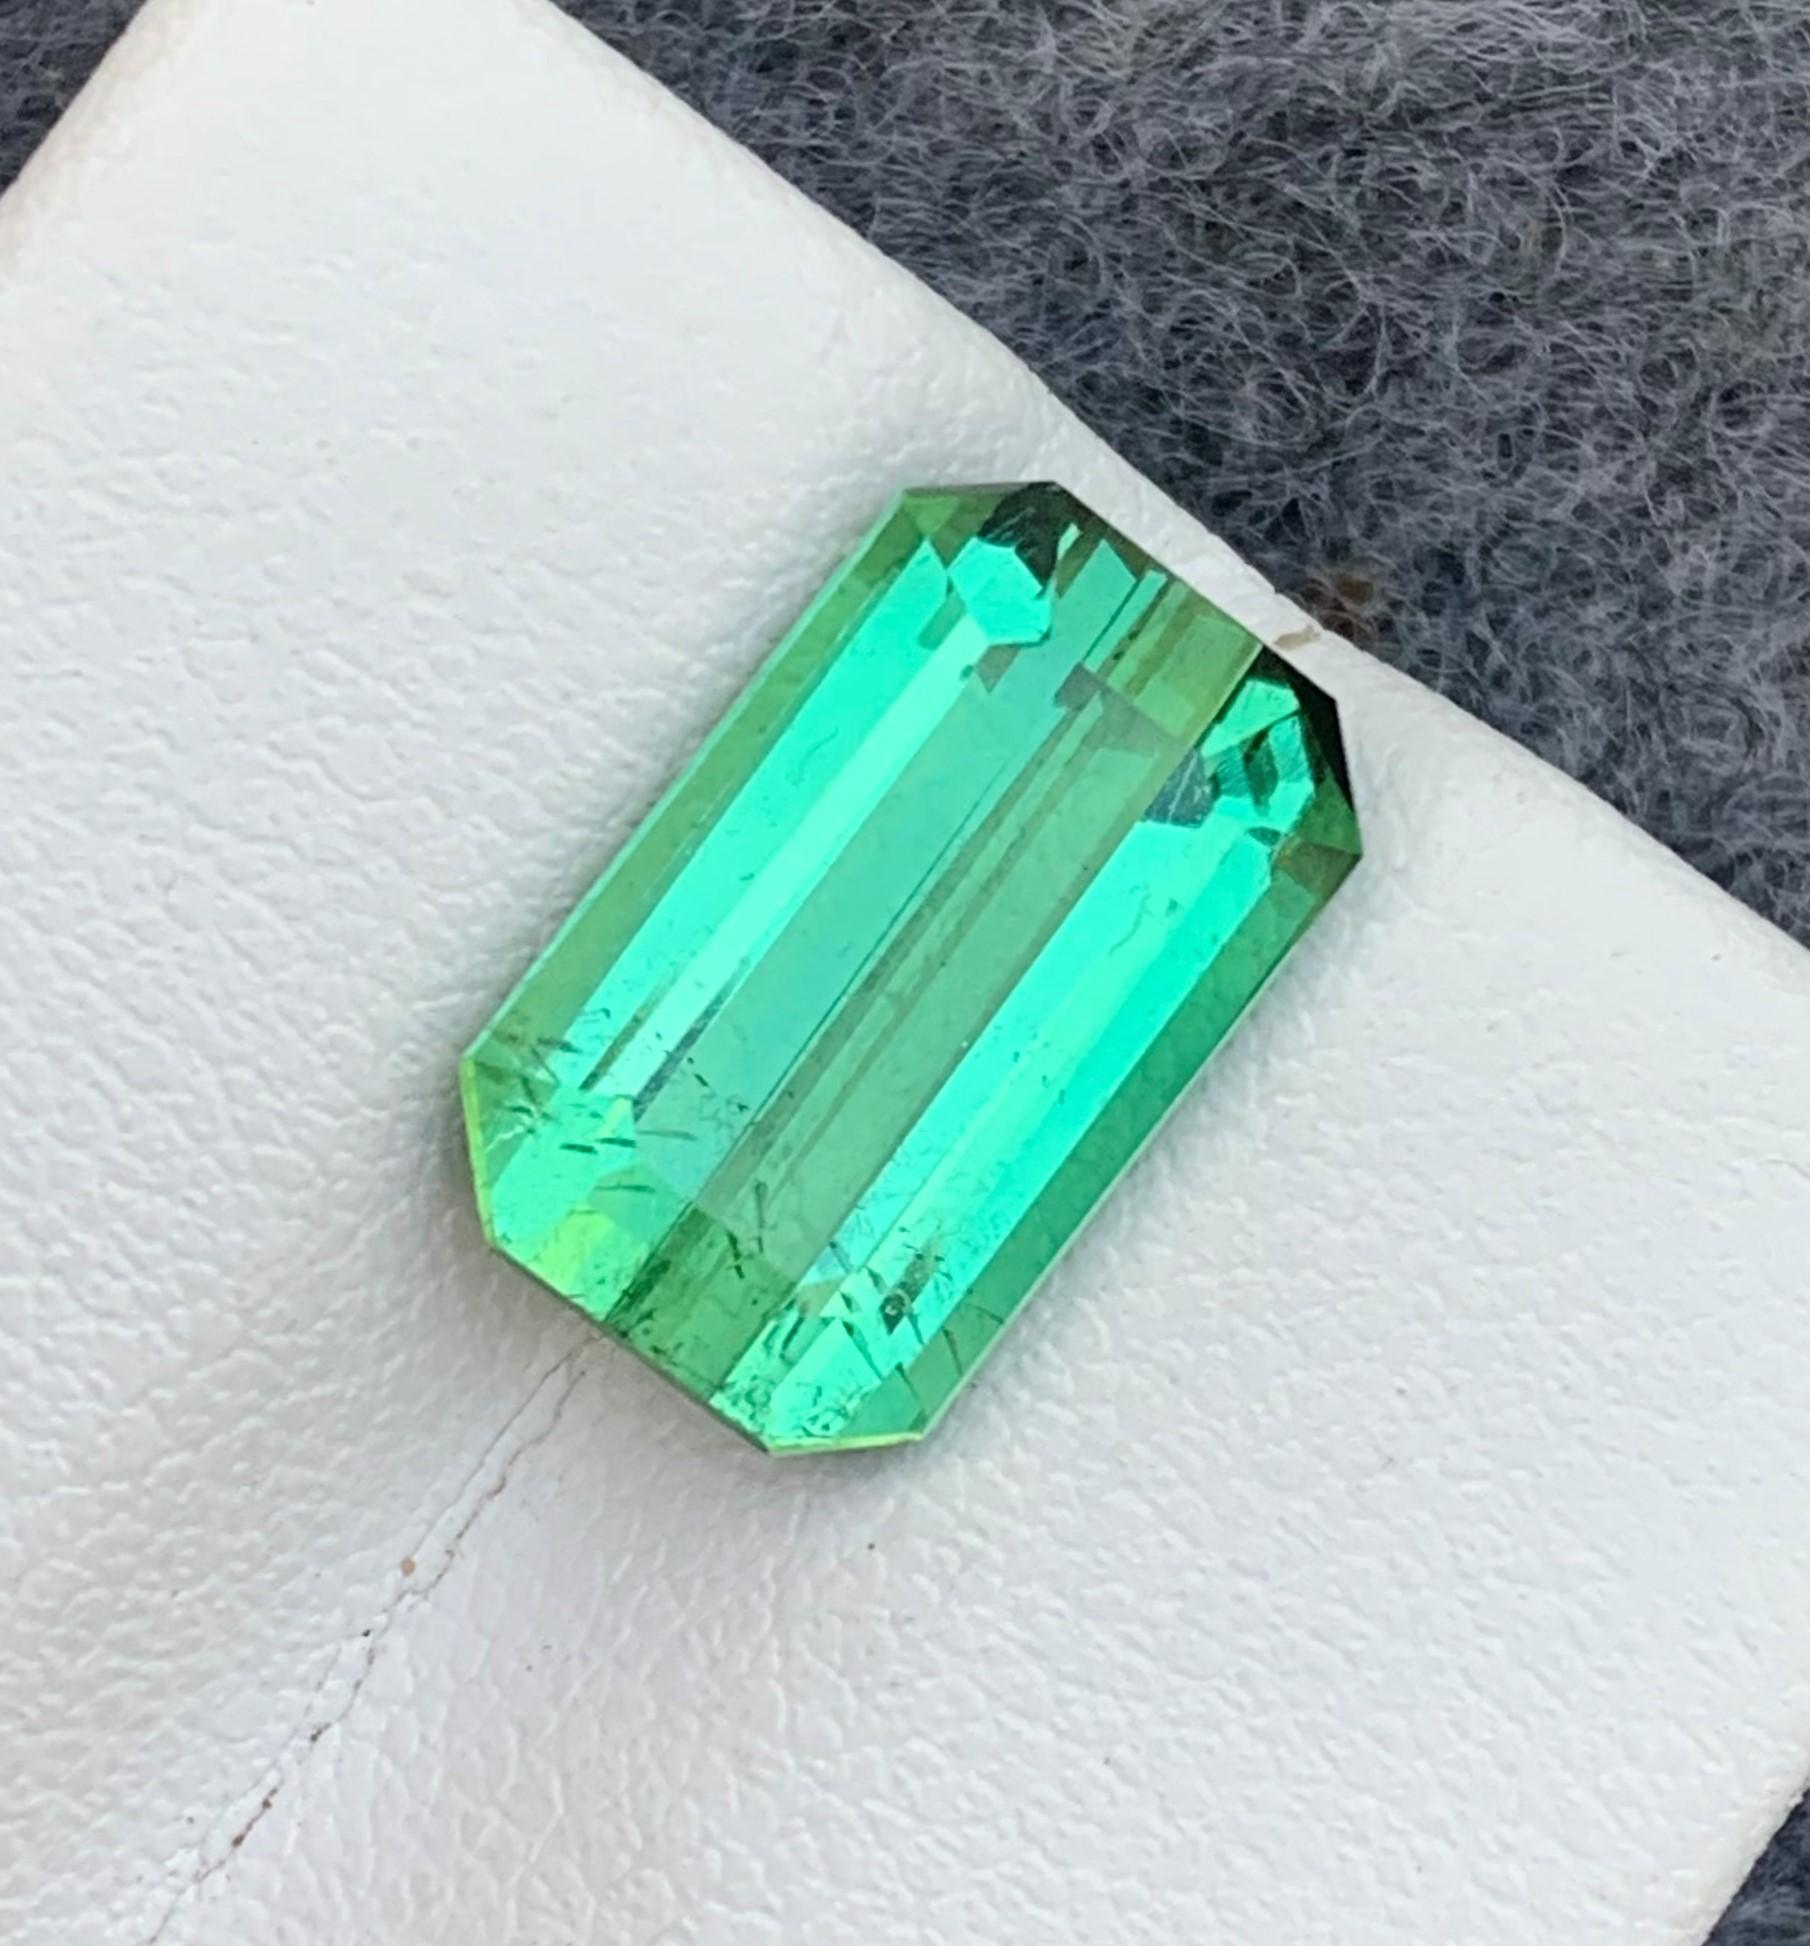 Faceted Tourmaline
Weight: 5.70 Carats
Dimension: 13.2x8.2x5.8 Mm
Origin: Kunar Afghanistan Mine
Shape: Emerald 
Color: Green
Quality: SI
Certificate: On Demand
Green Tourmaline moves healing energy throughout the body, bringing a sense of vitality